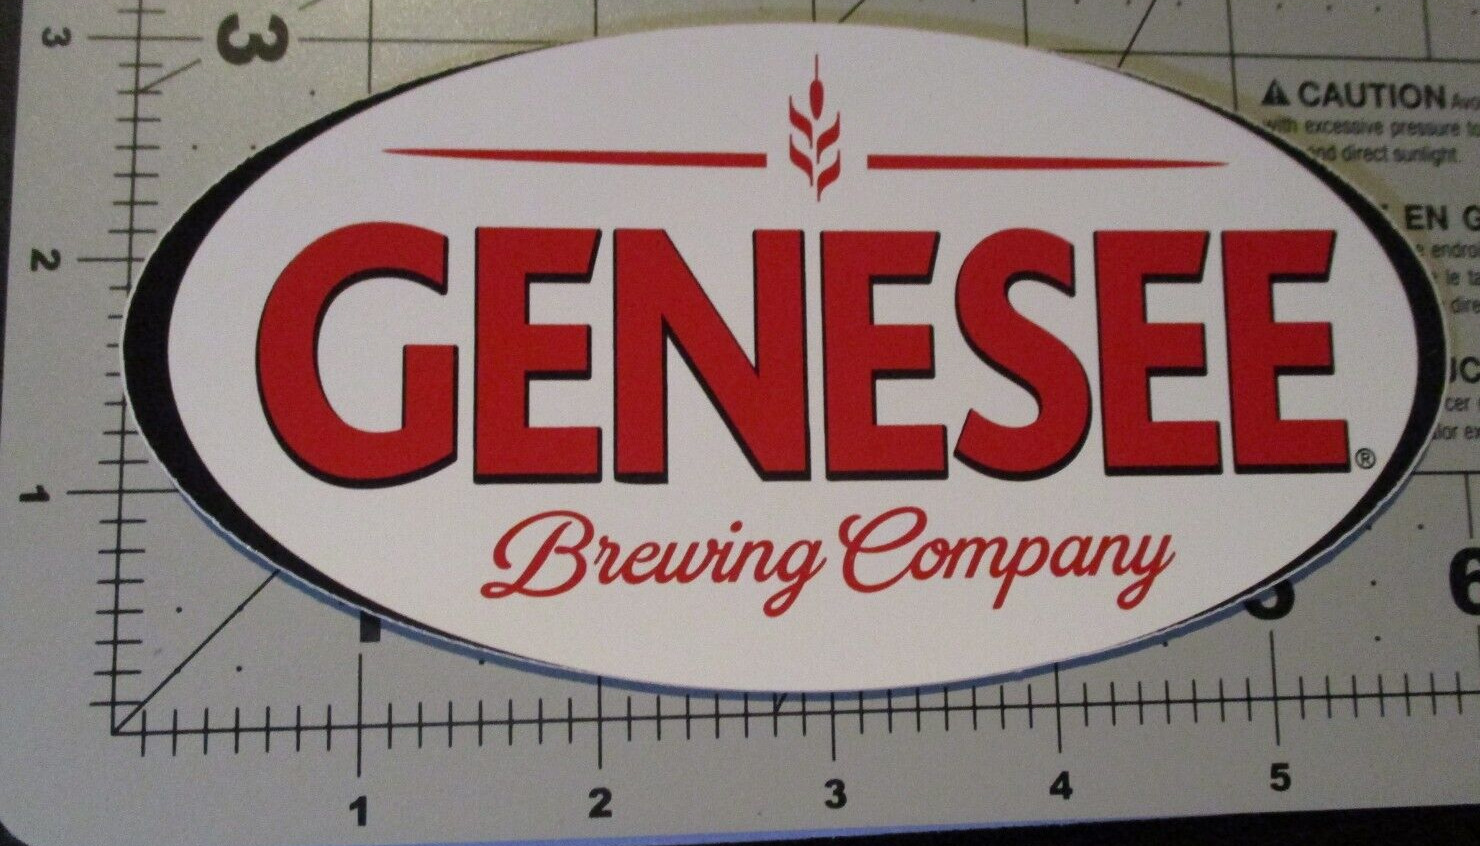 GENESEE BEER Dundee new york oval STICKER decal craft beer brewery brewing